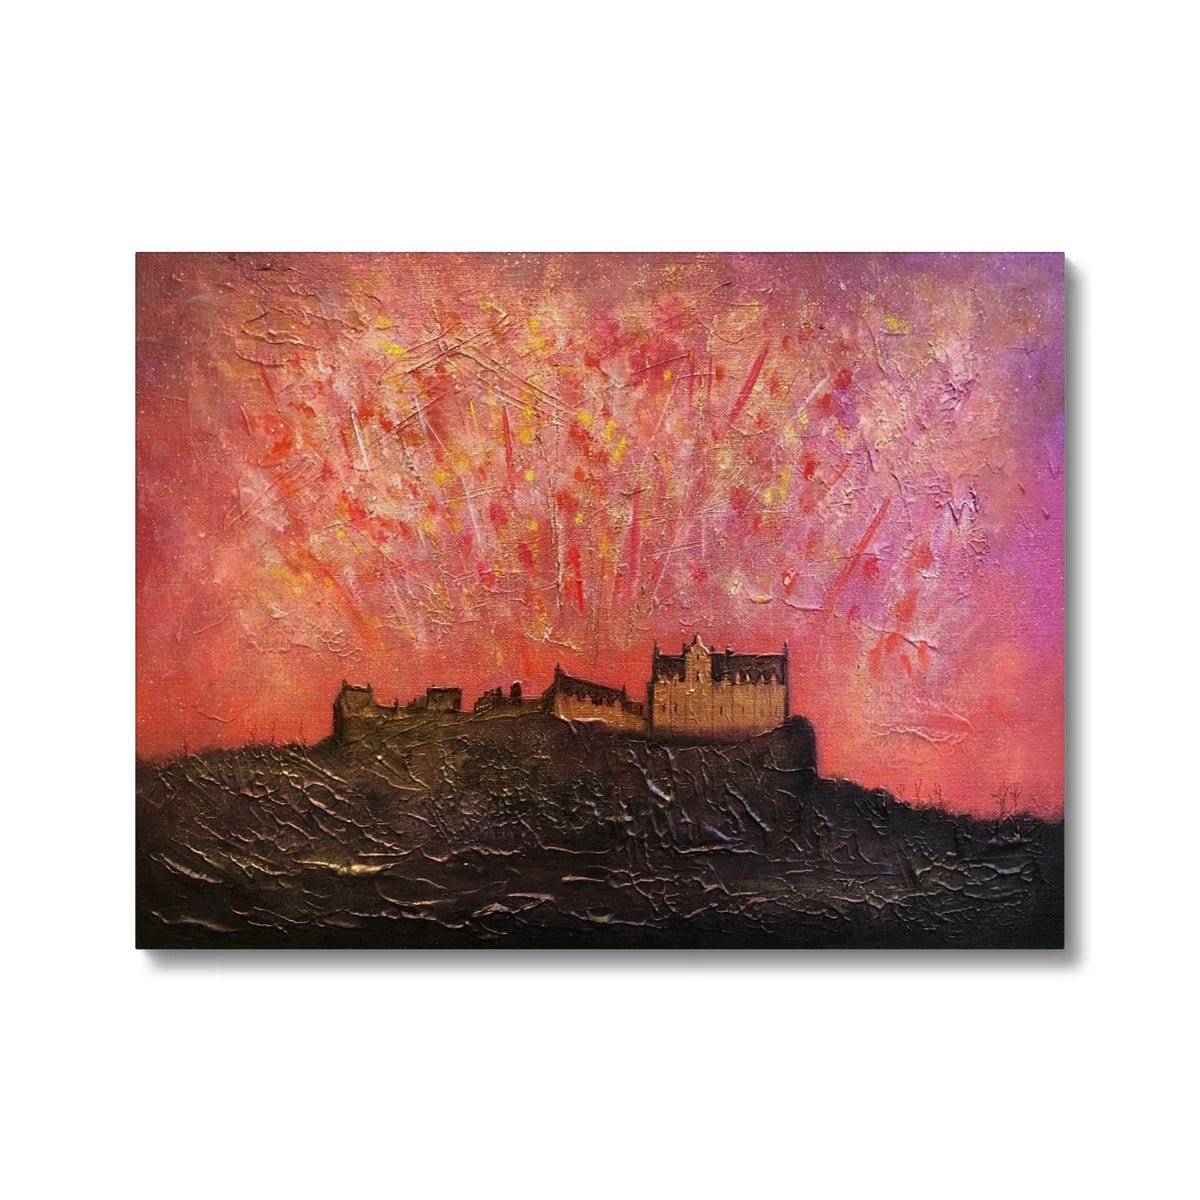 Edinburgh Castle Fireworks Painting | Canvas From Scotland-Contemporary Stretched Canvas Prints-Edinburgh & Glasgow Art Gallery-24"x18"-Paintings, Prints, Homeware, Art Gifts From Scotland By Scottish Artist Kevin Hunter